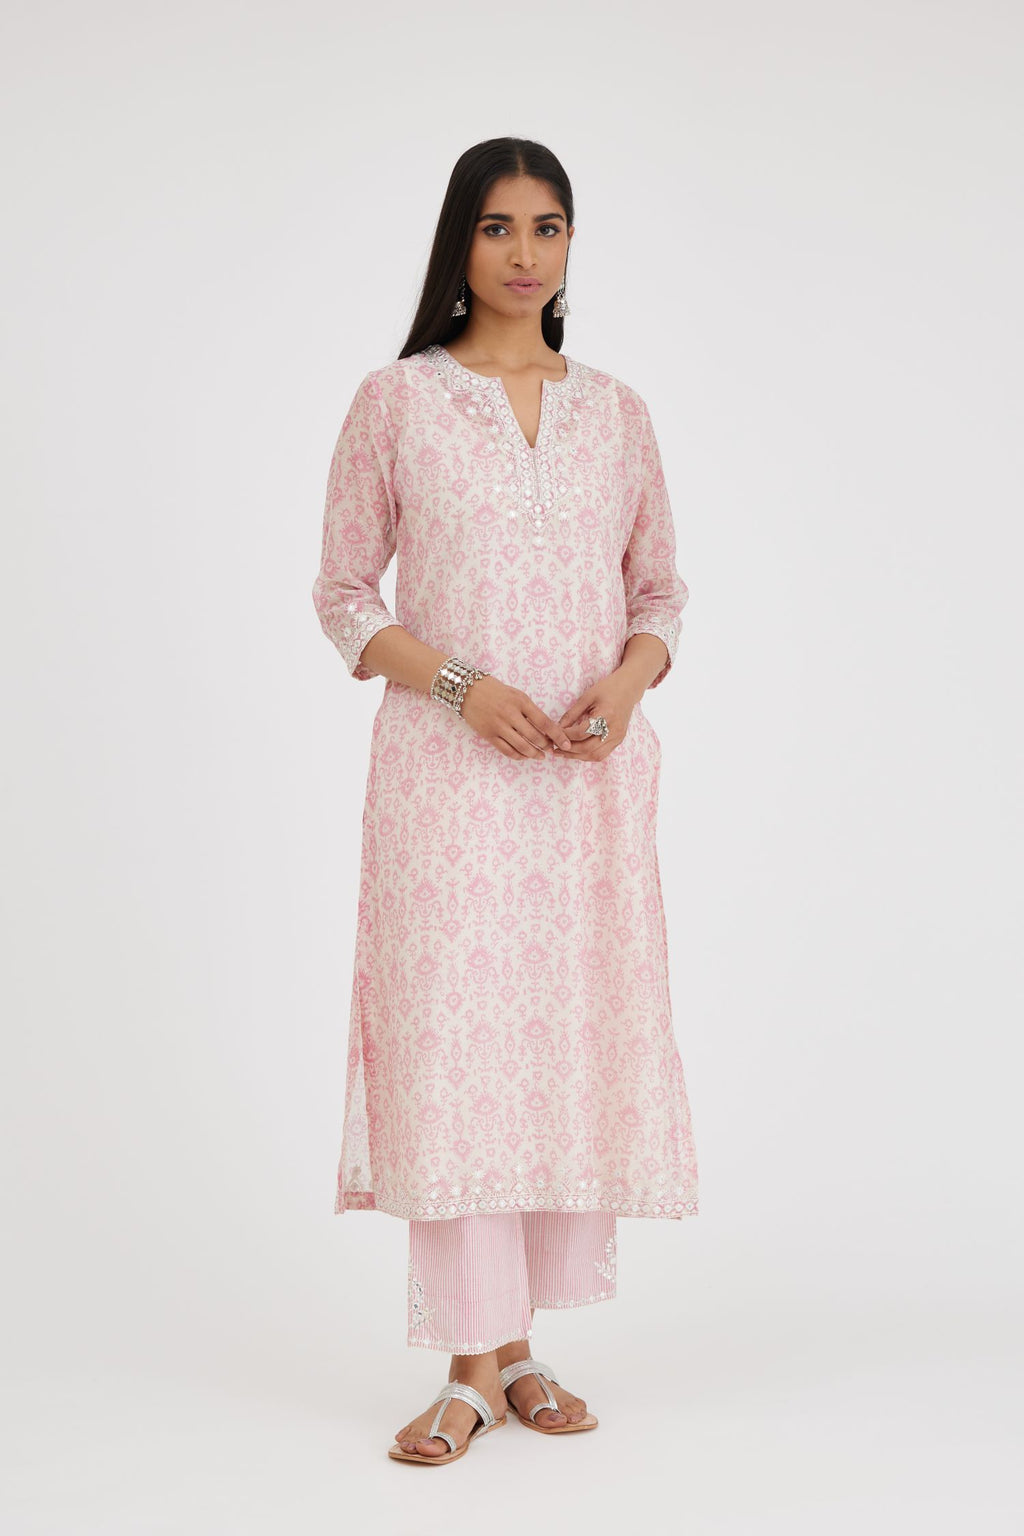 Ikat design pink and off white hand block-printed Cotton Chanderi straight long kurta set with off-white thread and mirror embroidery